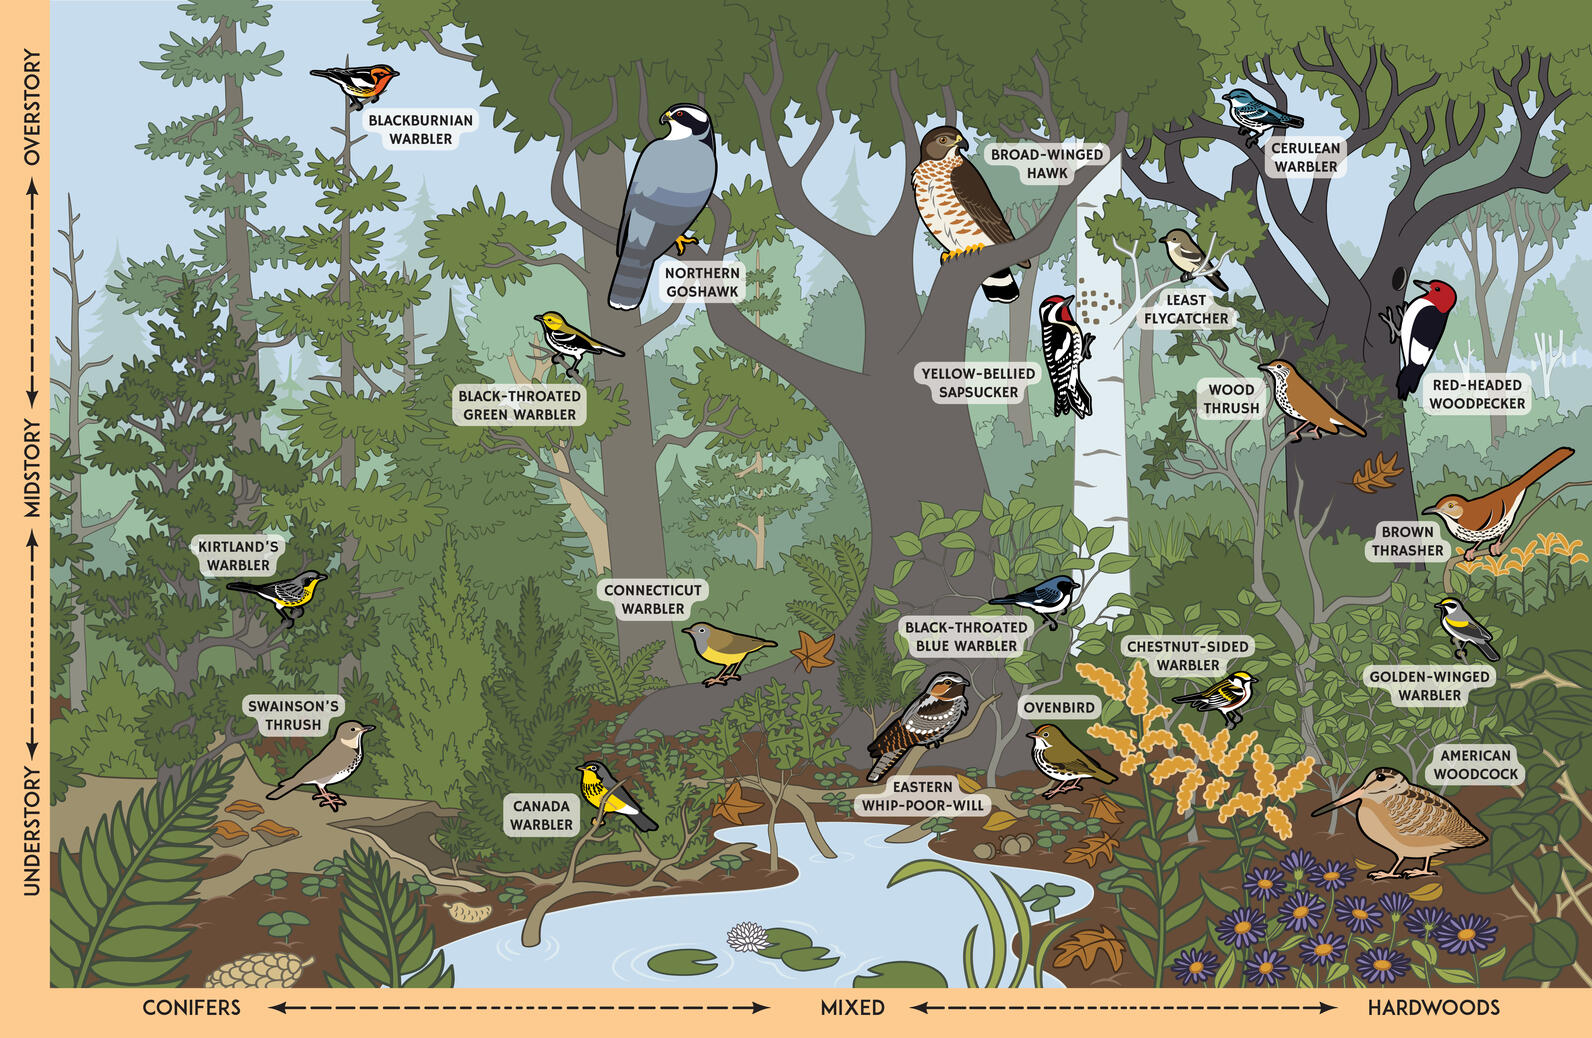 Illustration of 20 priority bird species and where they can be found in the canopy as well as which kinds of forests they can be found in, such as conifers, mixed forests, or hardwoods. 